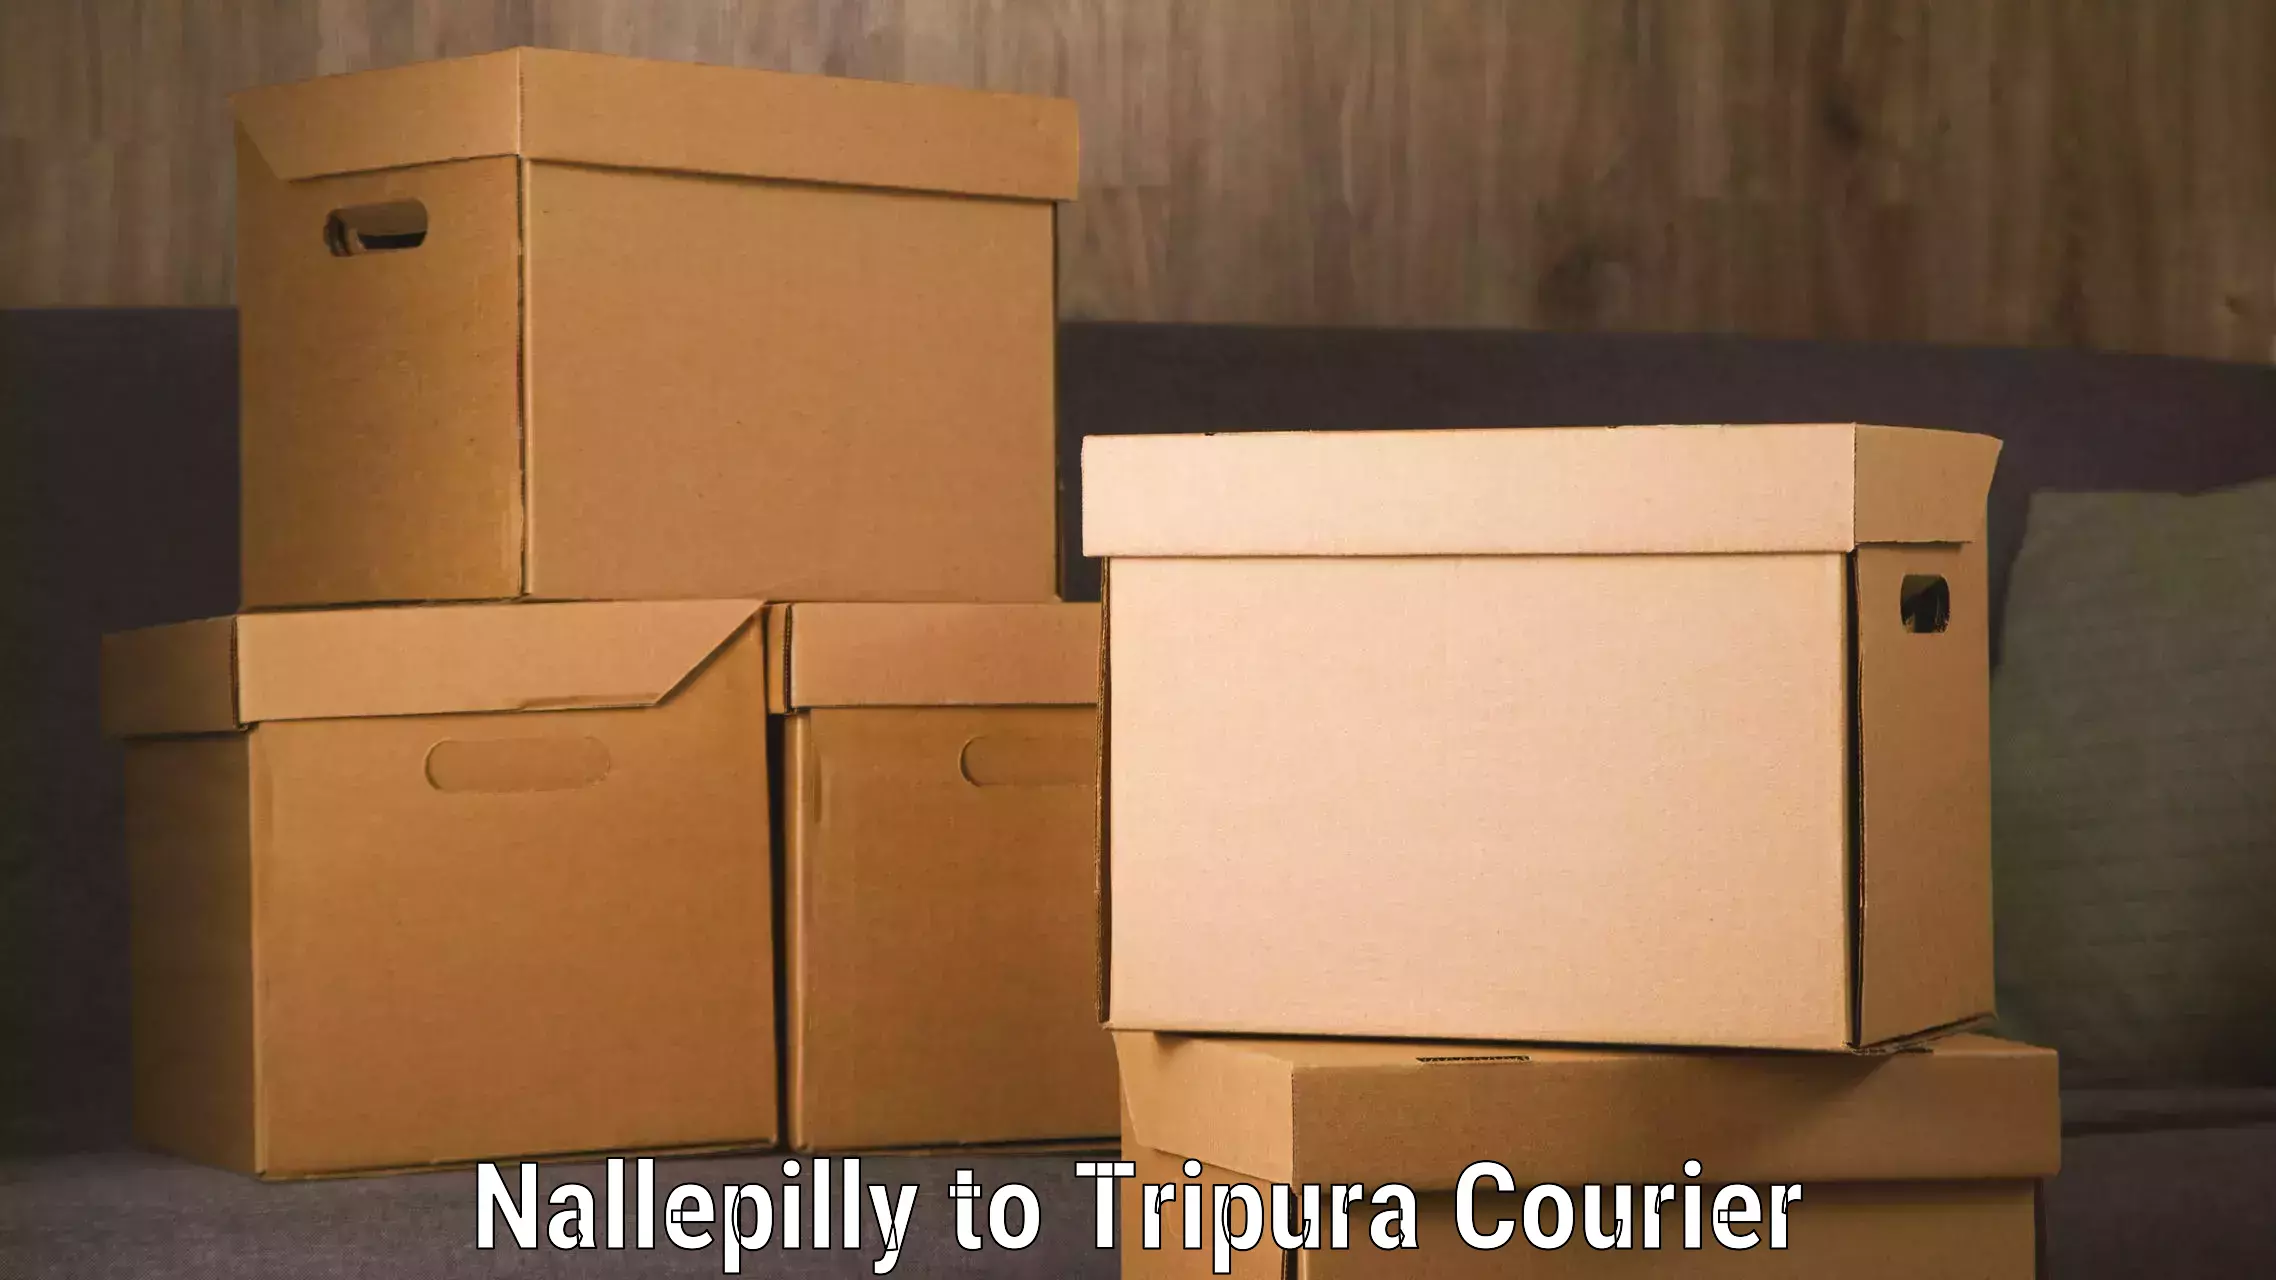 Same day shipping Nallepilly to Udaipur Tripura